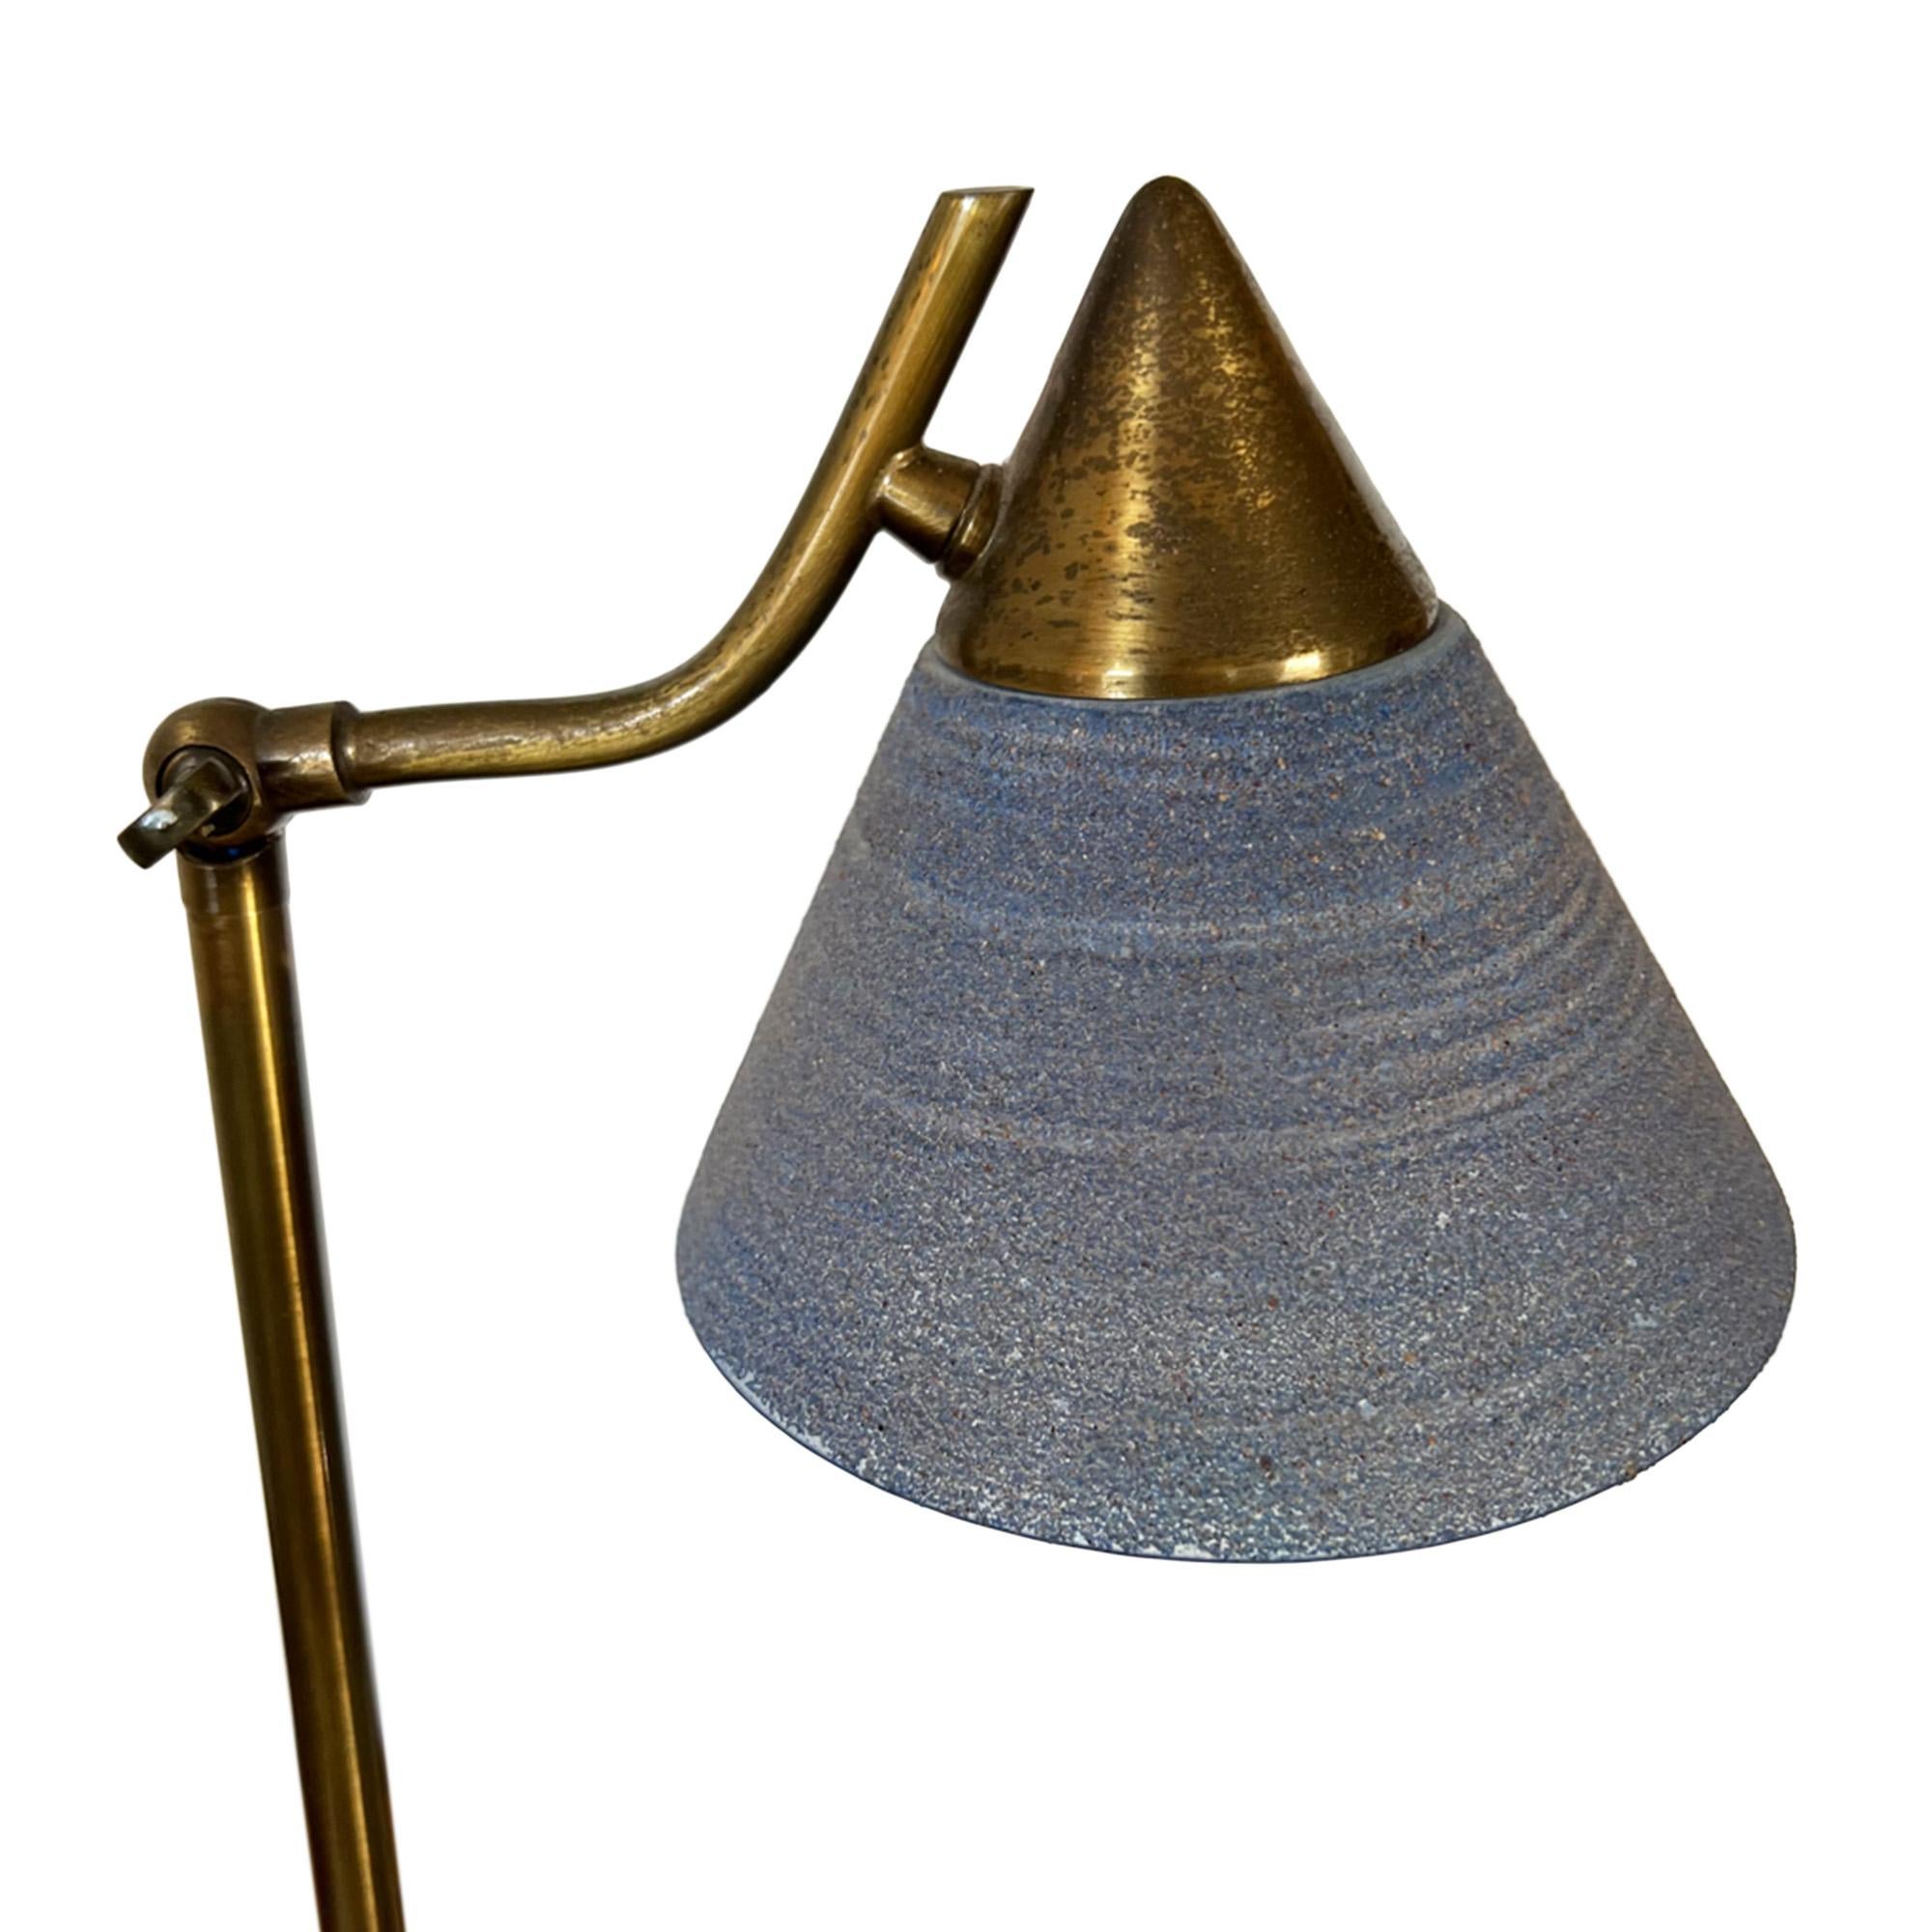 This charming little French mid century table lamp adds a perfect touch of colour with its original blue glass shade.

This light adjusts using the screw at the top of the column - take a look at the close up picture. 

Made from brass, which